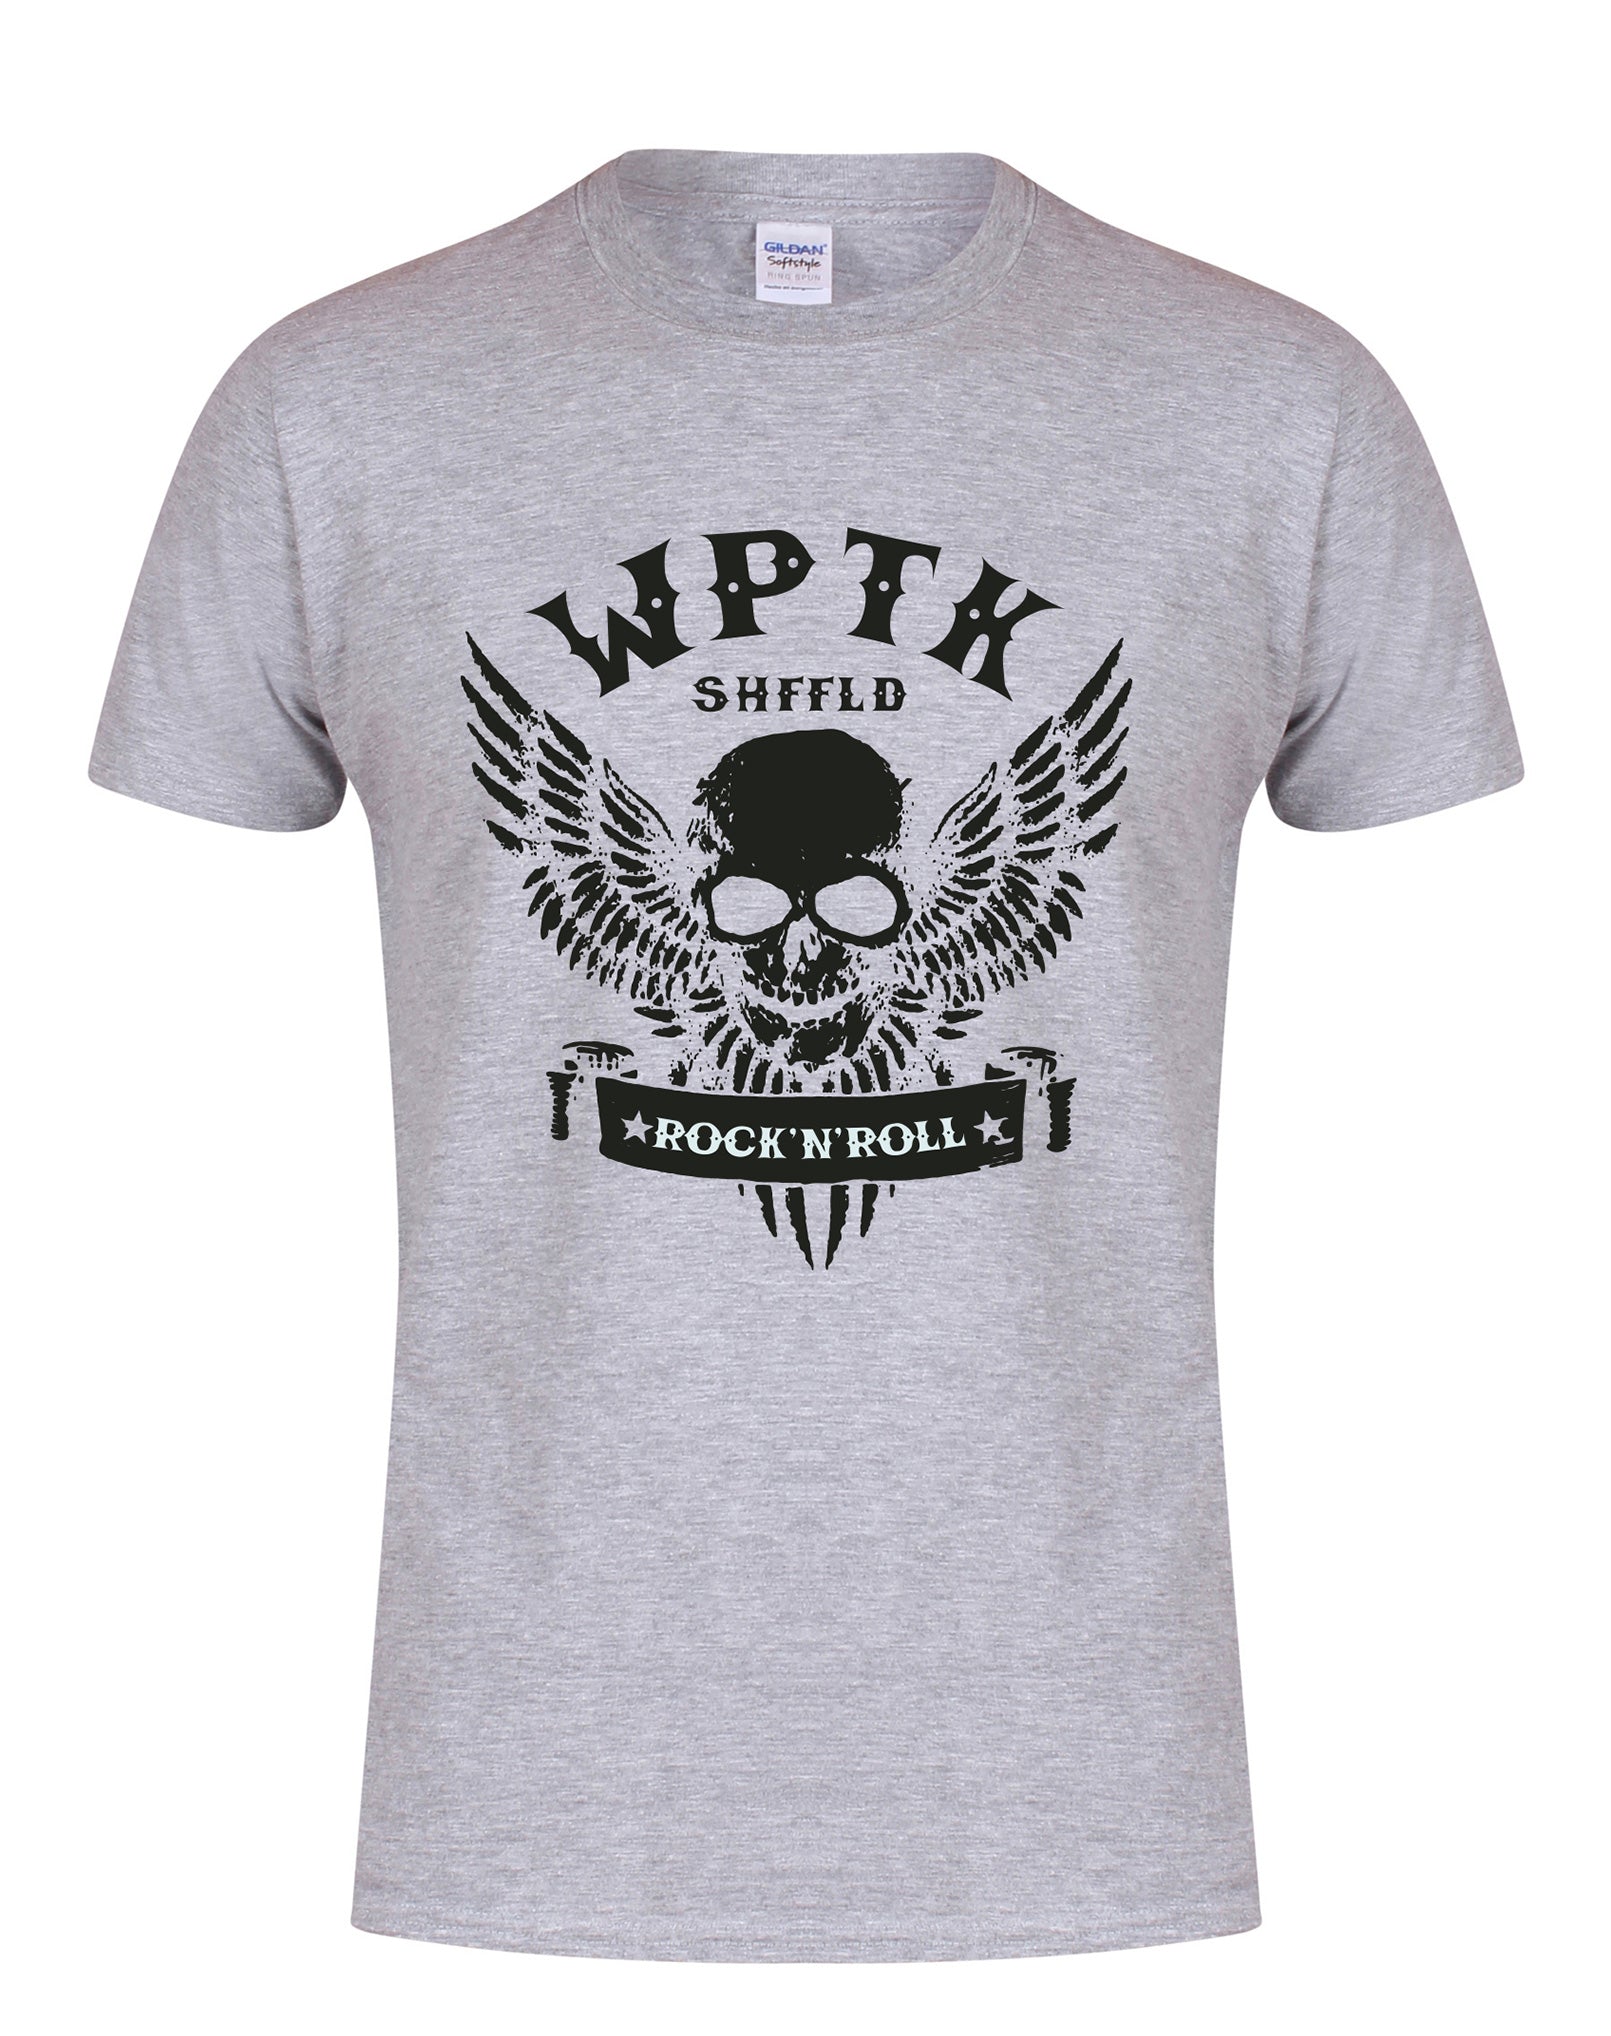 WPTK (Wapentake) skull/wings unisex fit T-shirt - various colours - Dirty Stop Outs